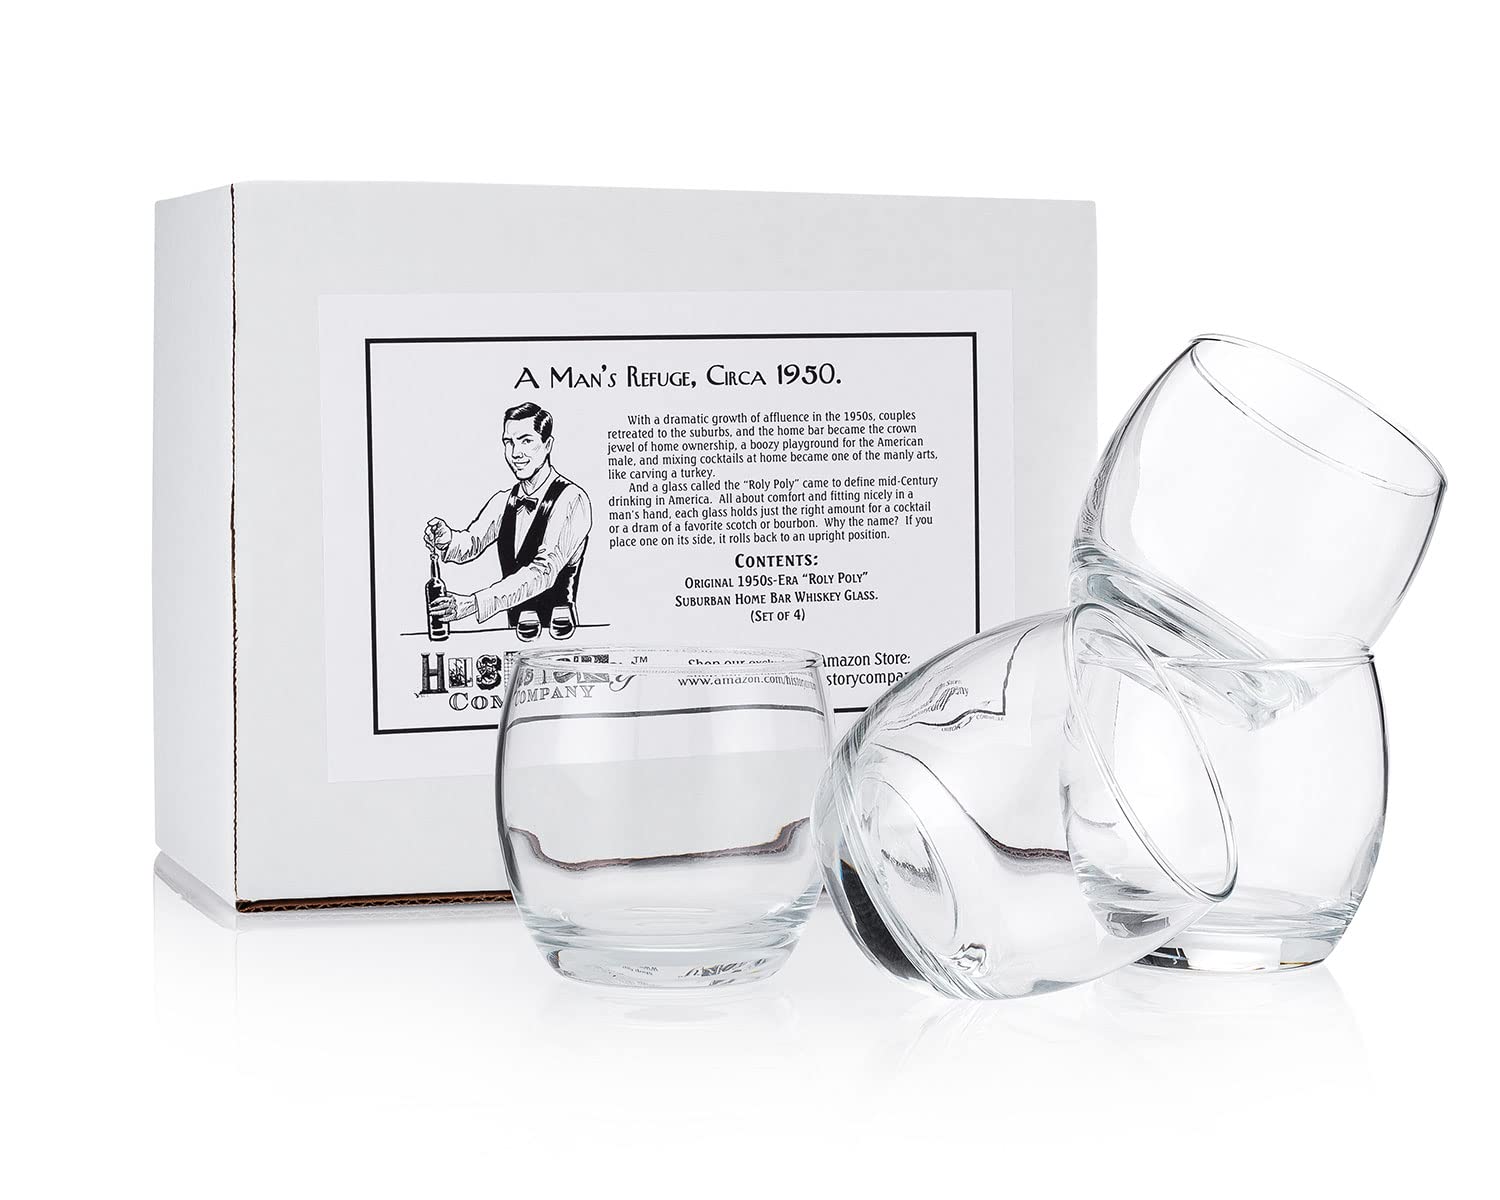 HISTORY COMPANY Original 1950s-Era “Roly Poly” Suburban Home Bar Whiskey Glass, 4.-Piece Set (Gift Box Collection)